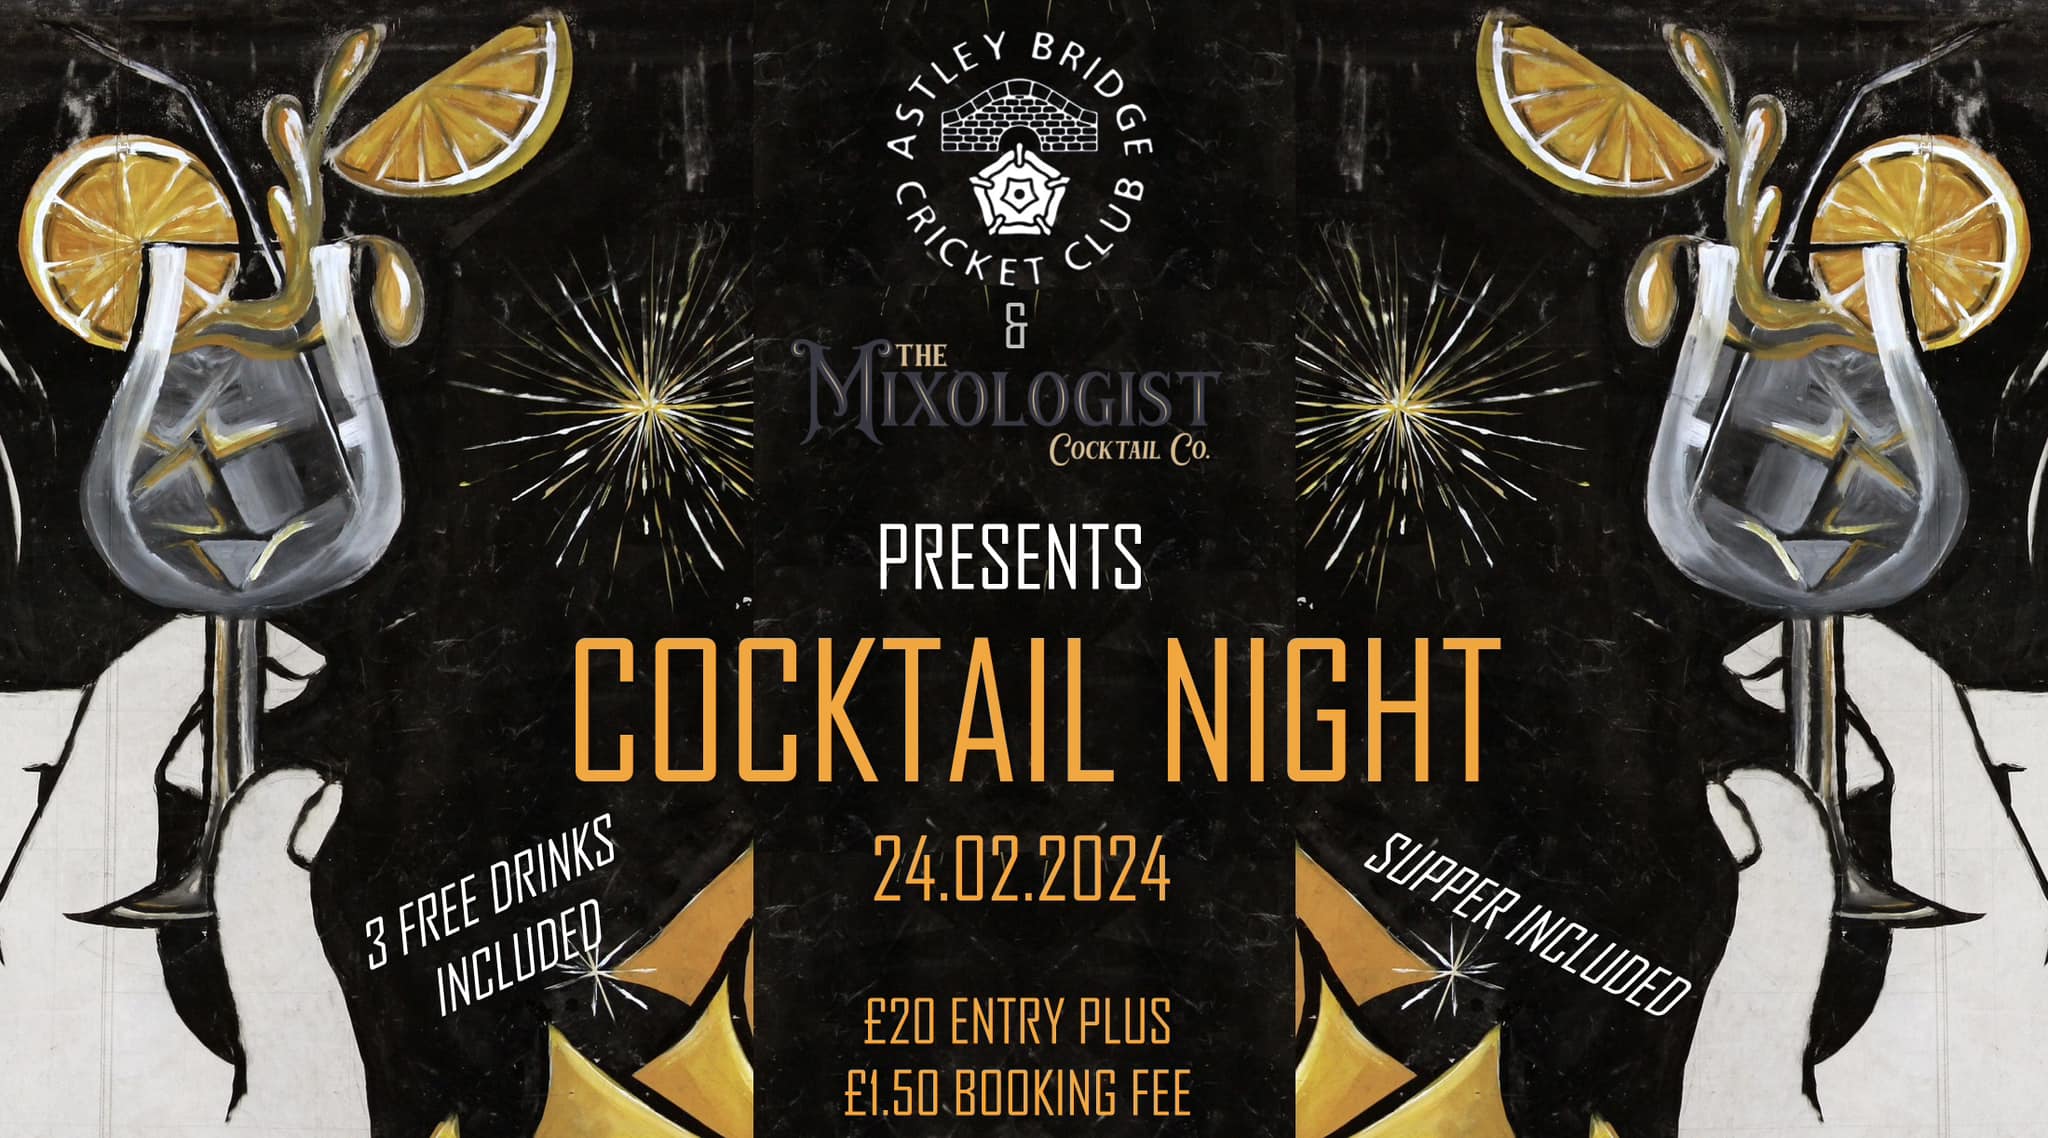 A poster advertising a Cocktail Night at Astley Bridge Cricket Club on 24/02/24.